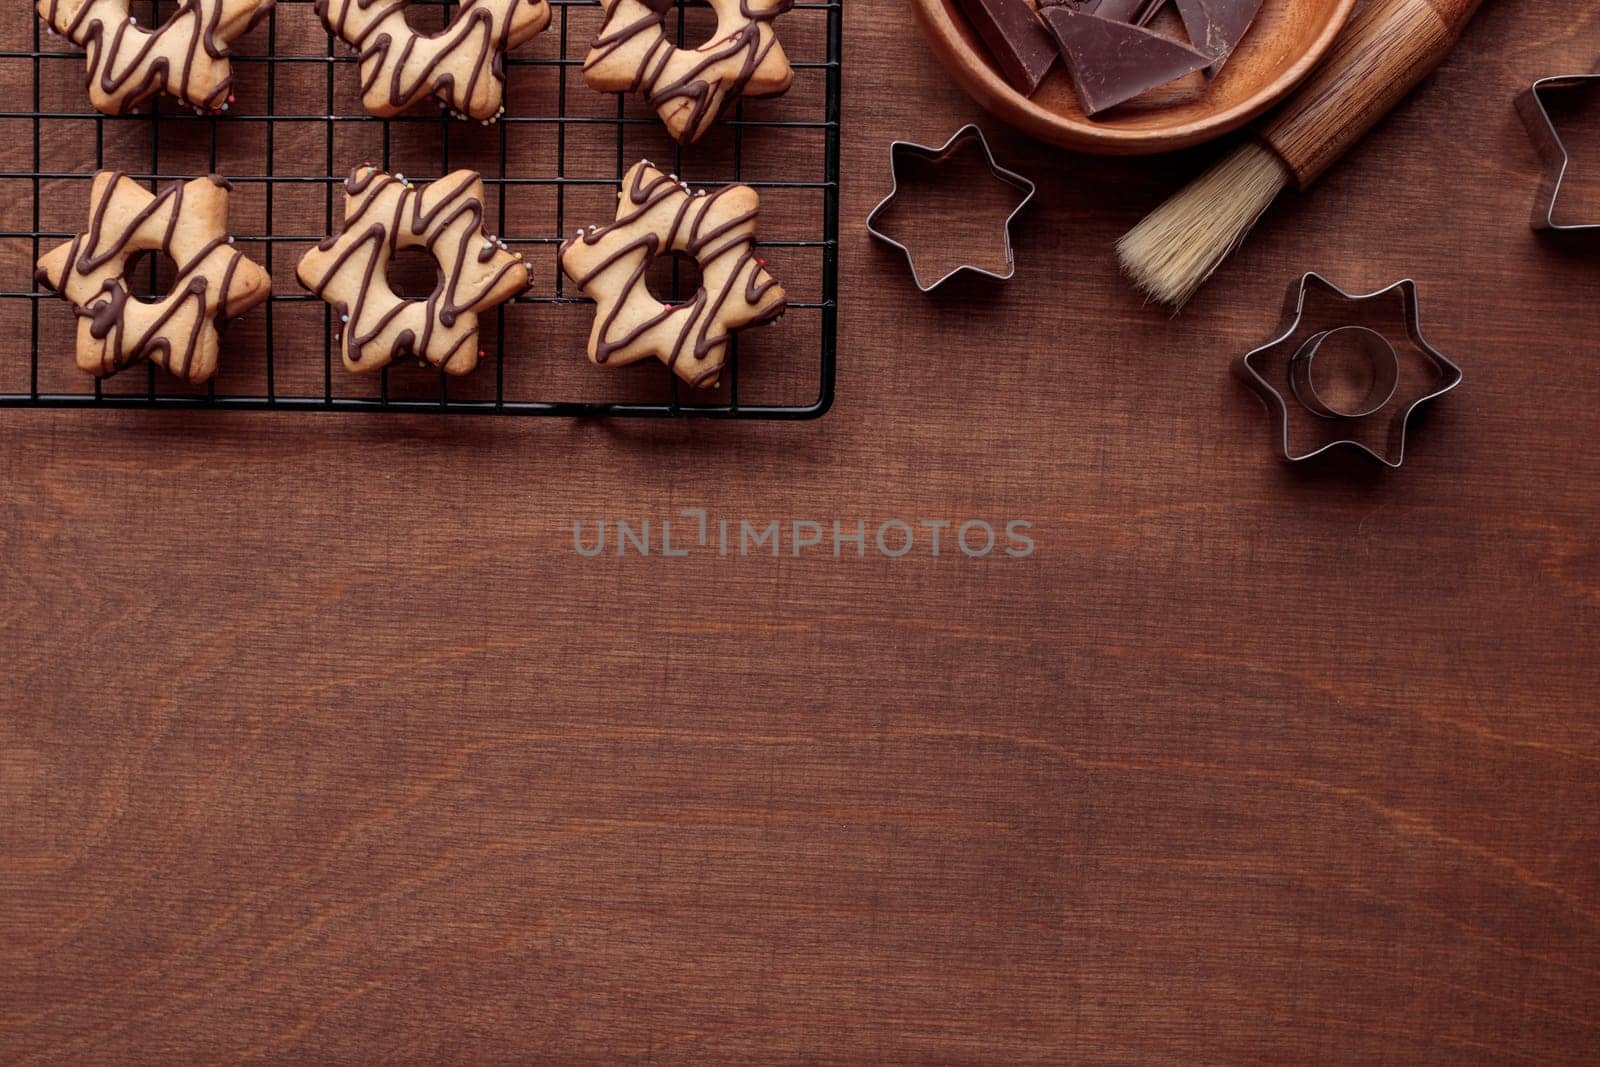 Freshly baked homemade star-shaped cookie with chocolate on the grid on the wooden table with a copy space, horizontal banner